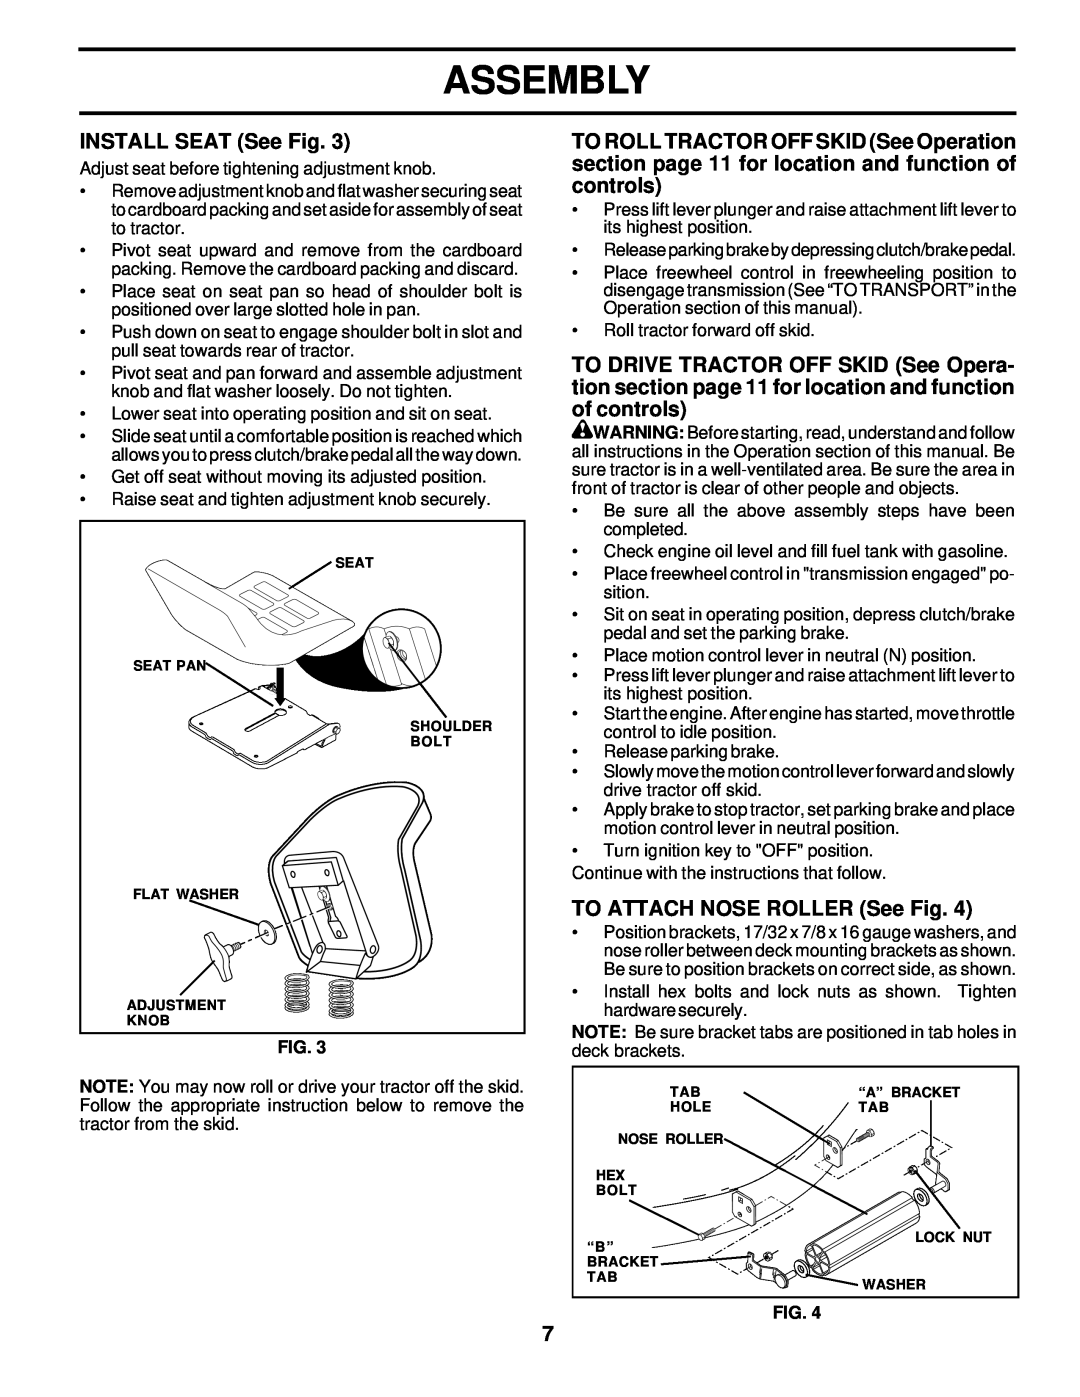 Weed Eater 178277 owner manual INSTALL SEAT See Fig, TO ATTACH NOSE ROLLER See Fig, Assembly 